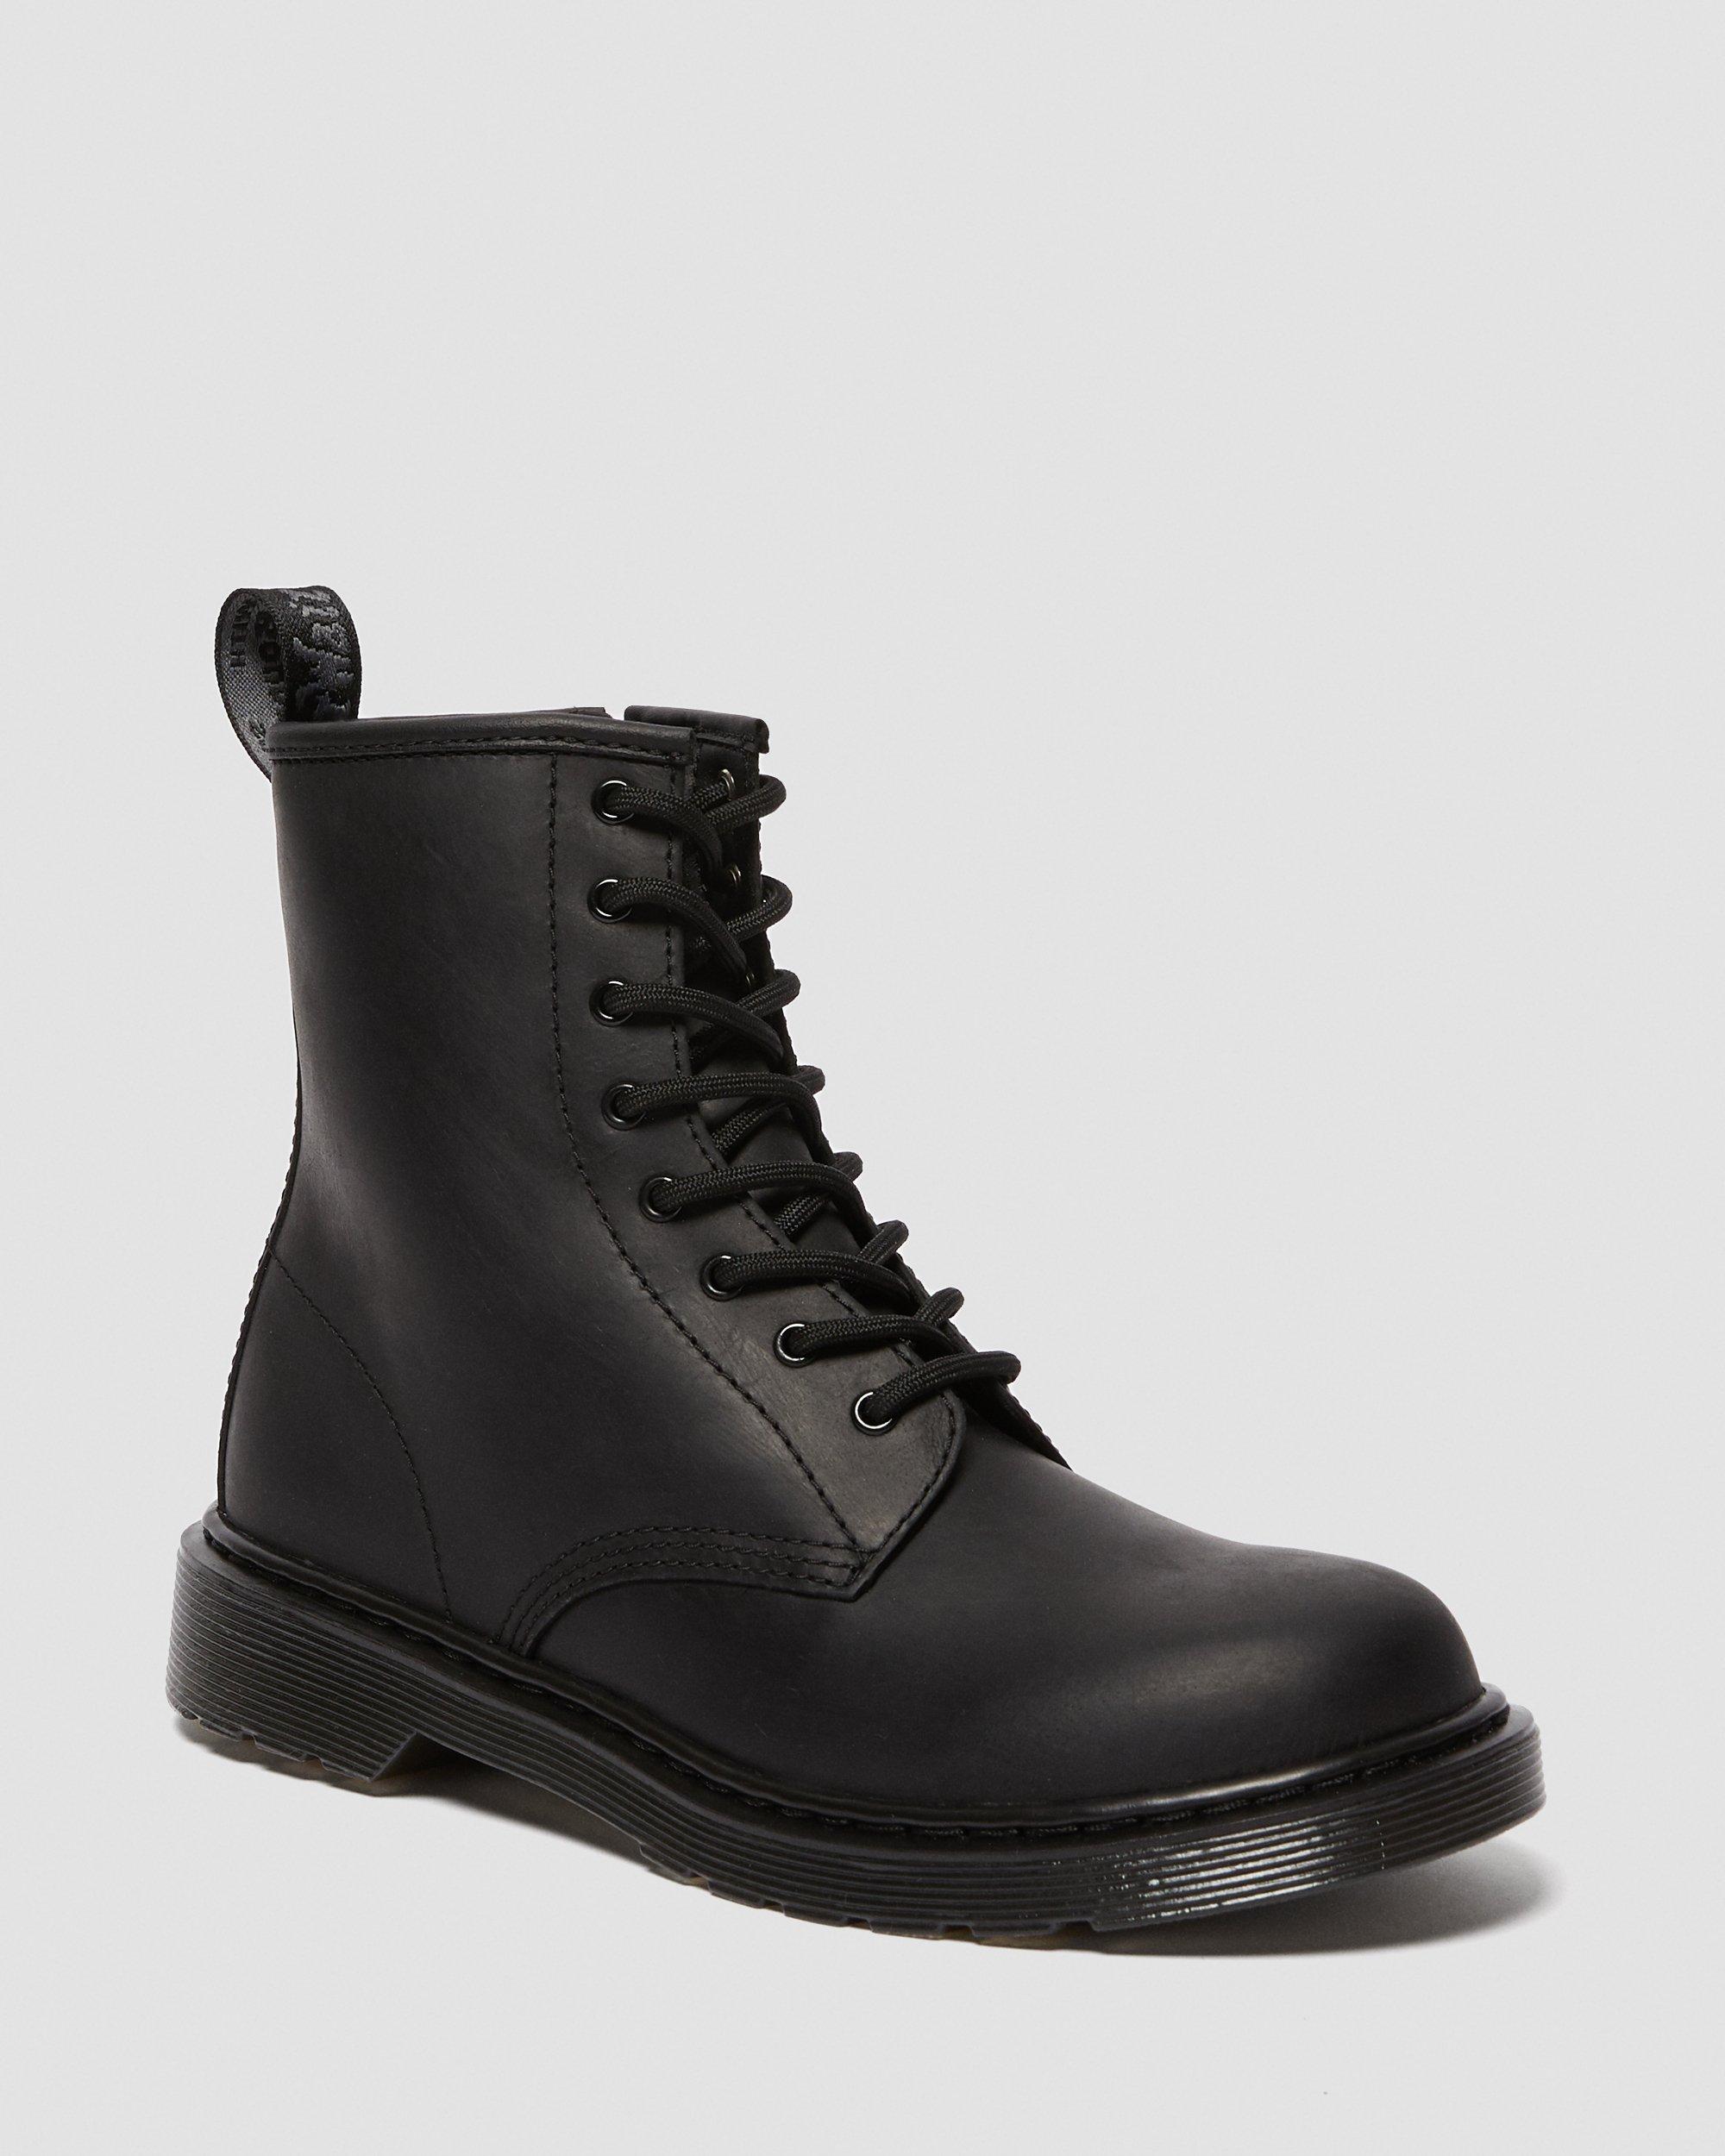 YOUTH 1460 FAUX FUR LINED BOOTS | Dr. Martens Official